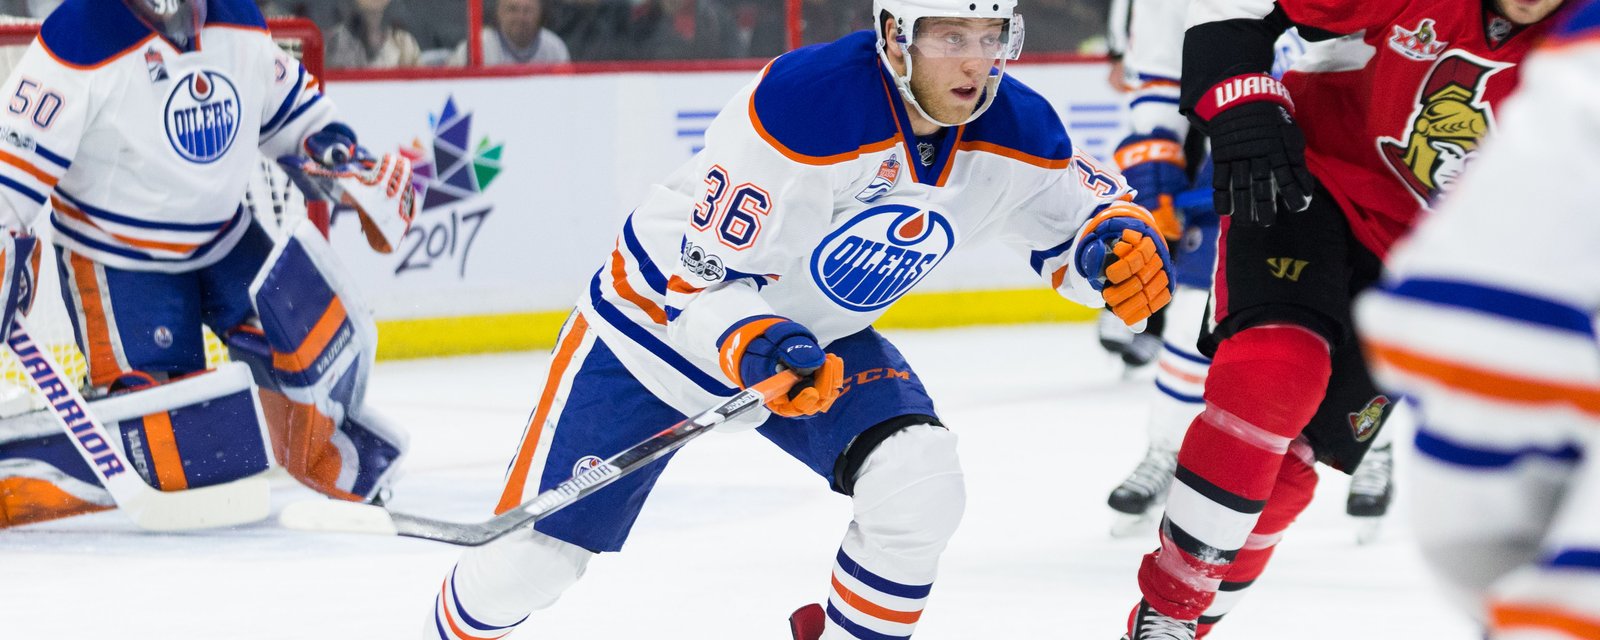 Five Oilers forwards who could have bigger roles this season.